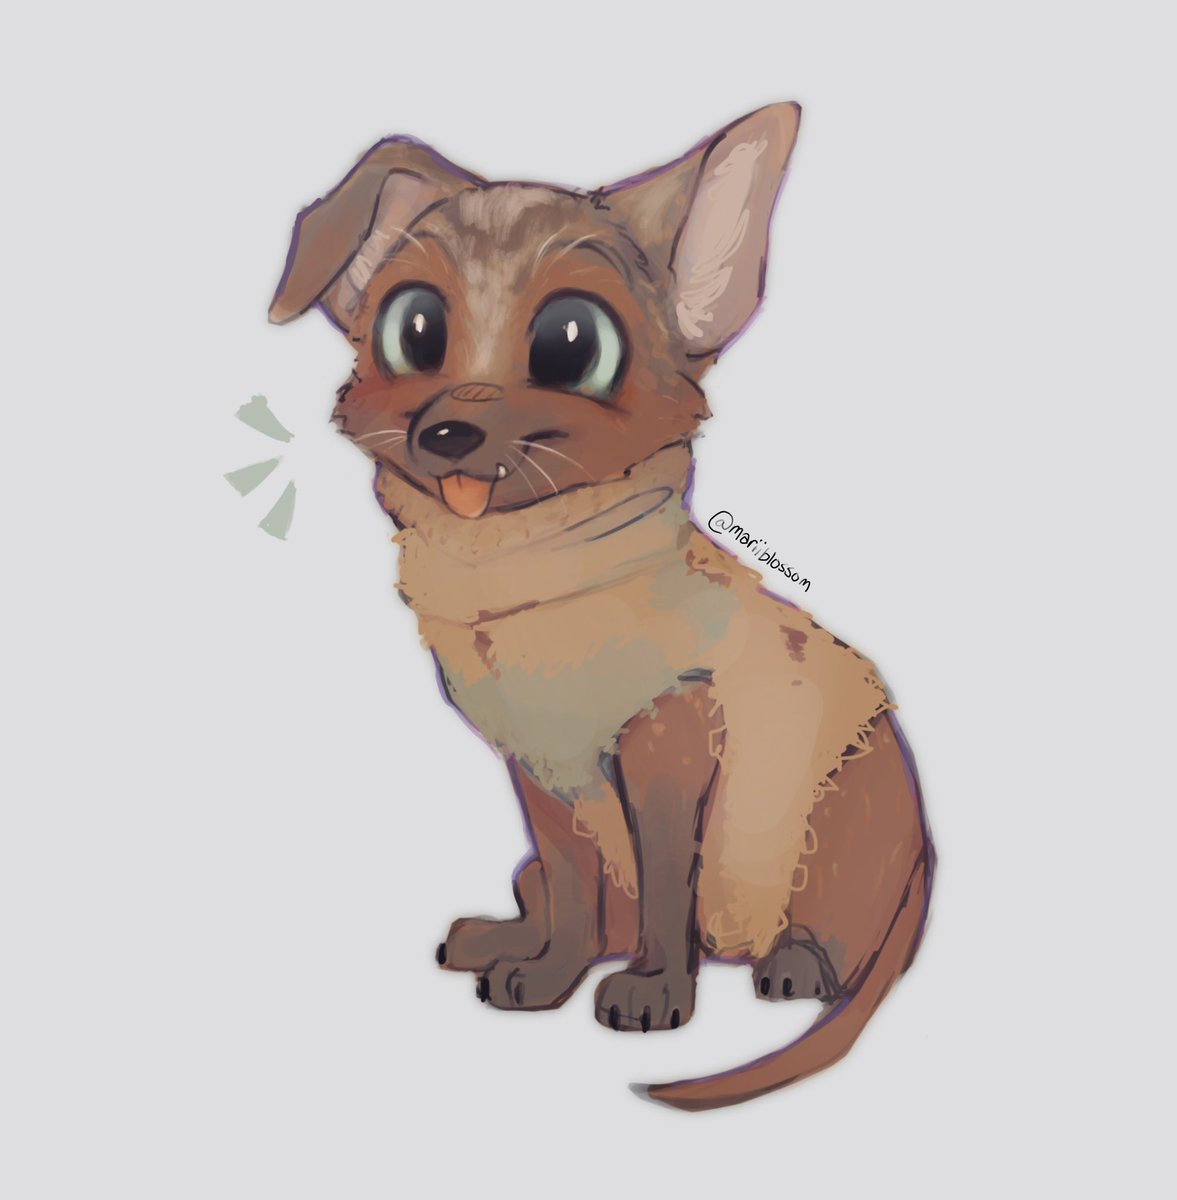 「a little perrito doodle, i lov him 」|mari 🌸 missing ateezのイラスト